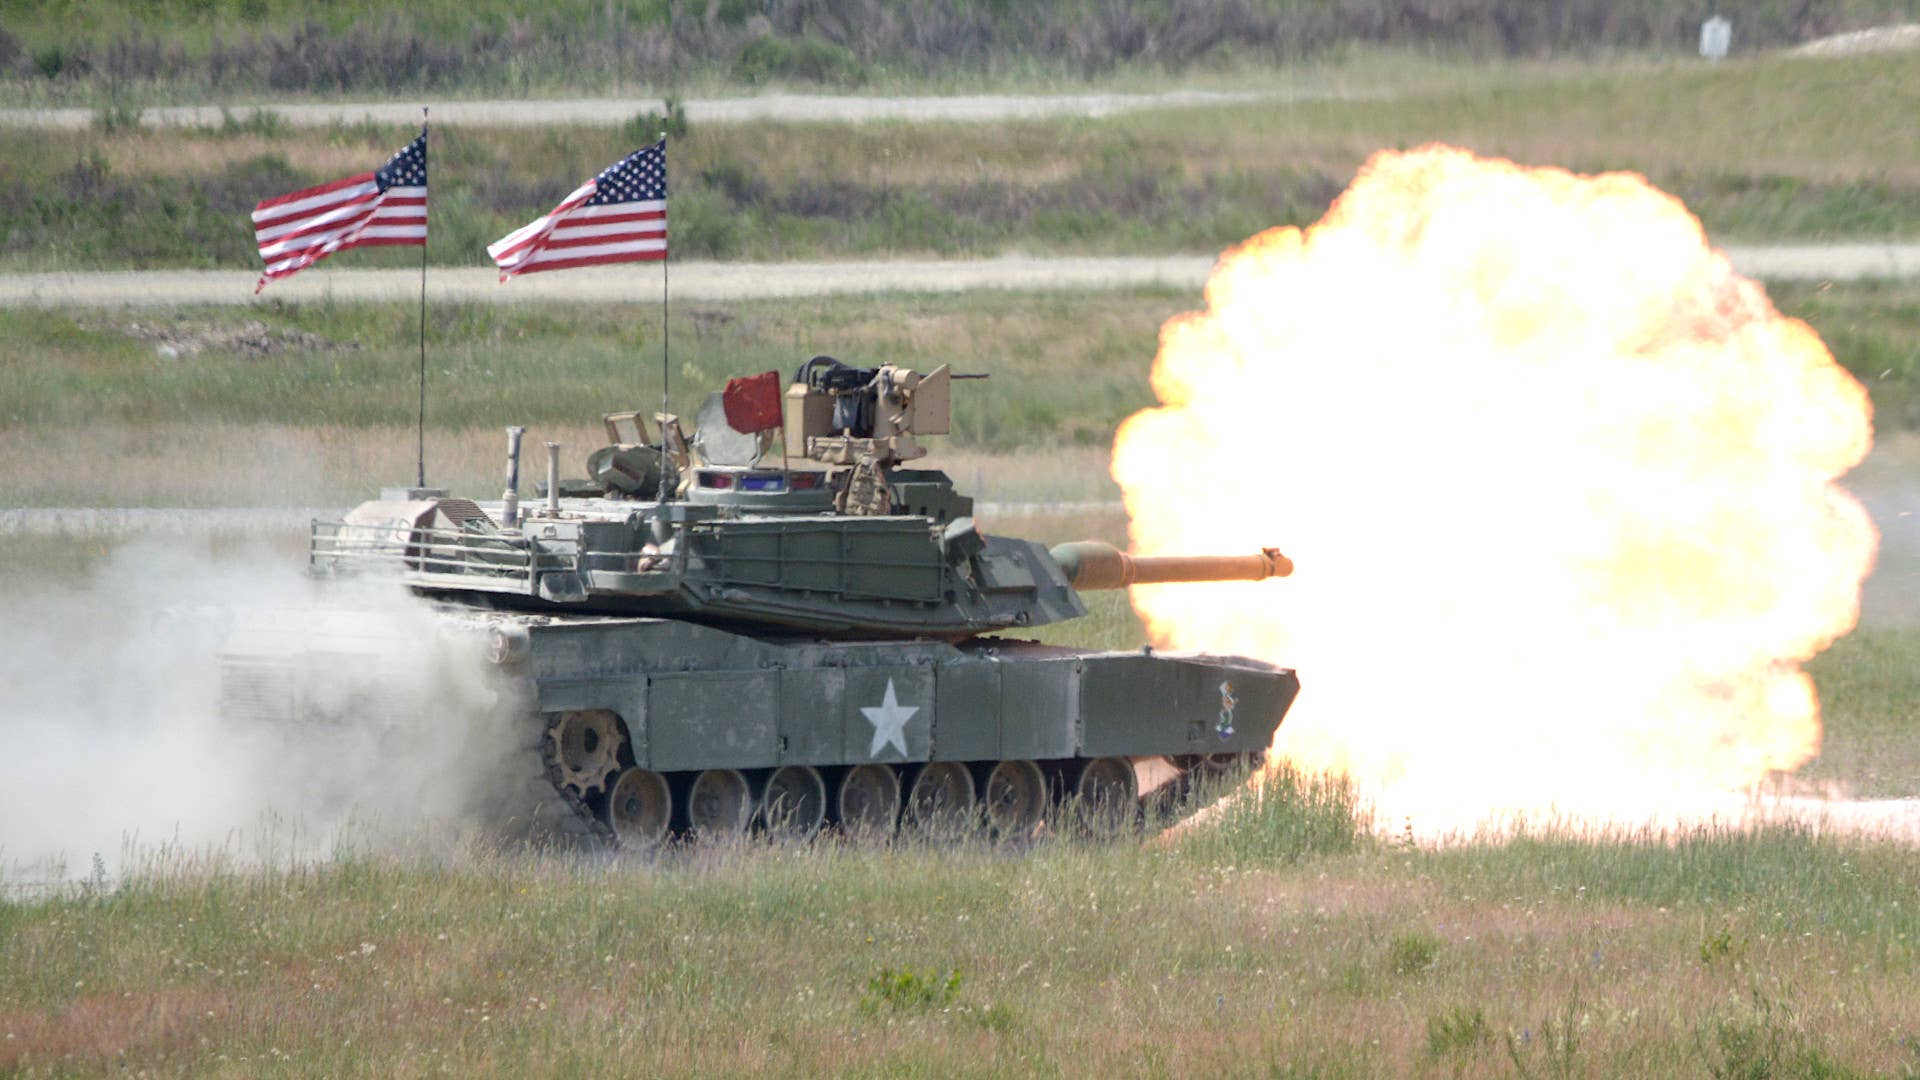 Up To 50 M1 Abrams Tanks Could Be Headed To Ukraine